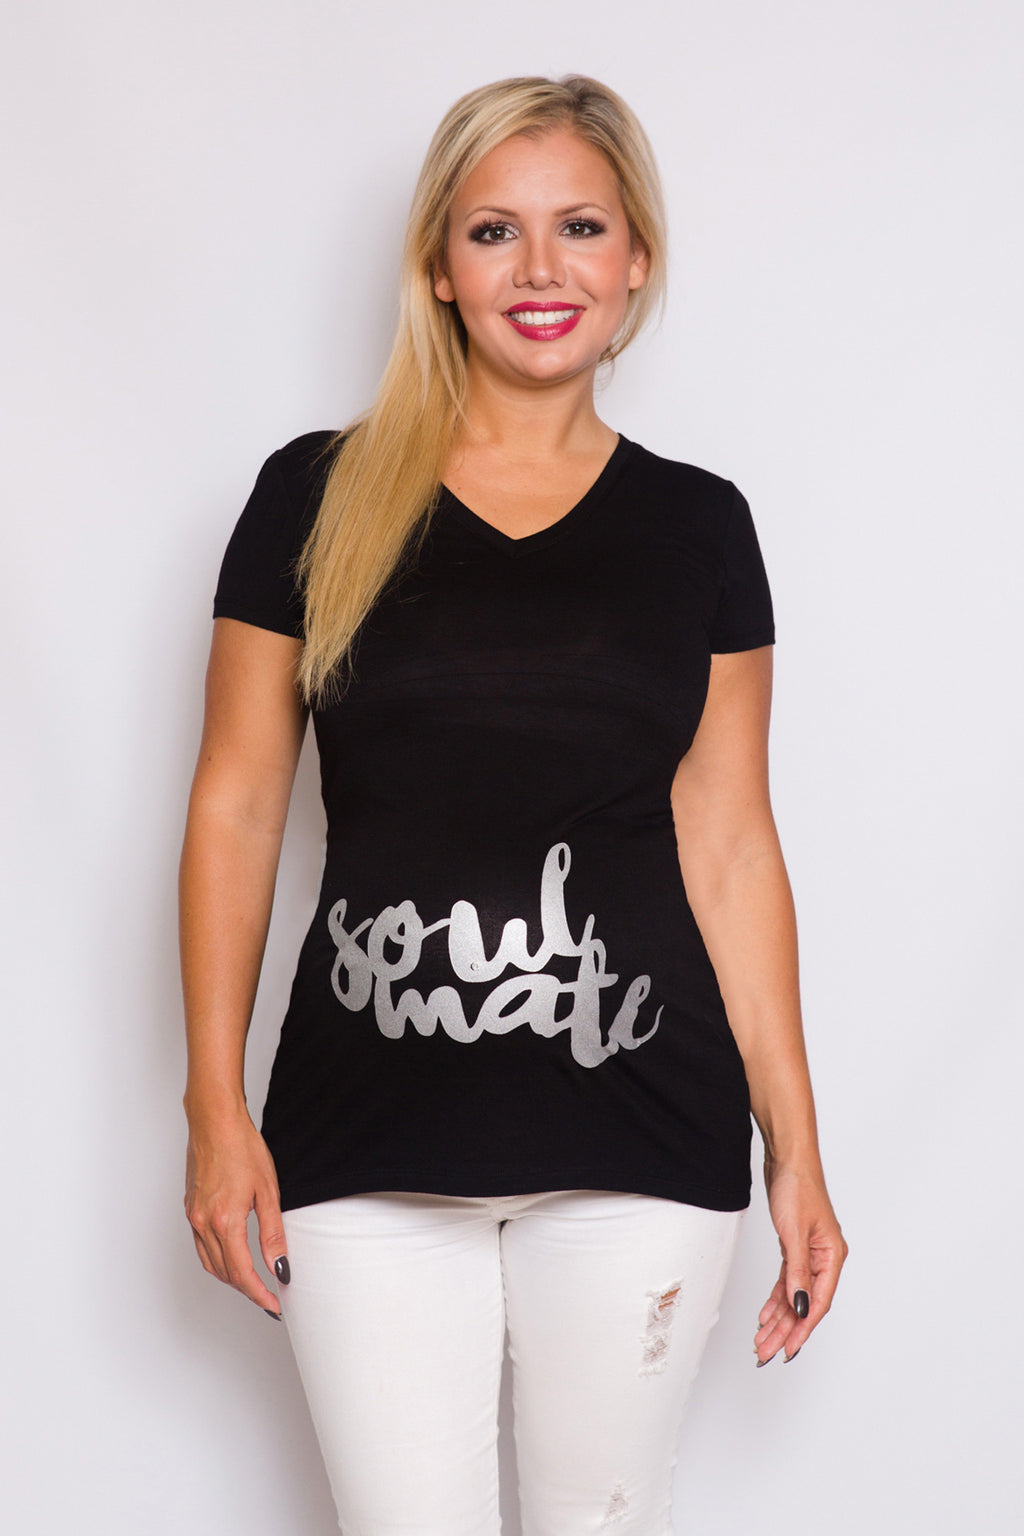 Soul Mate Maternity Top - Mommylicious